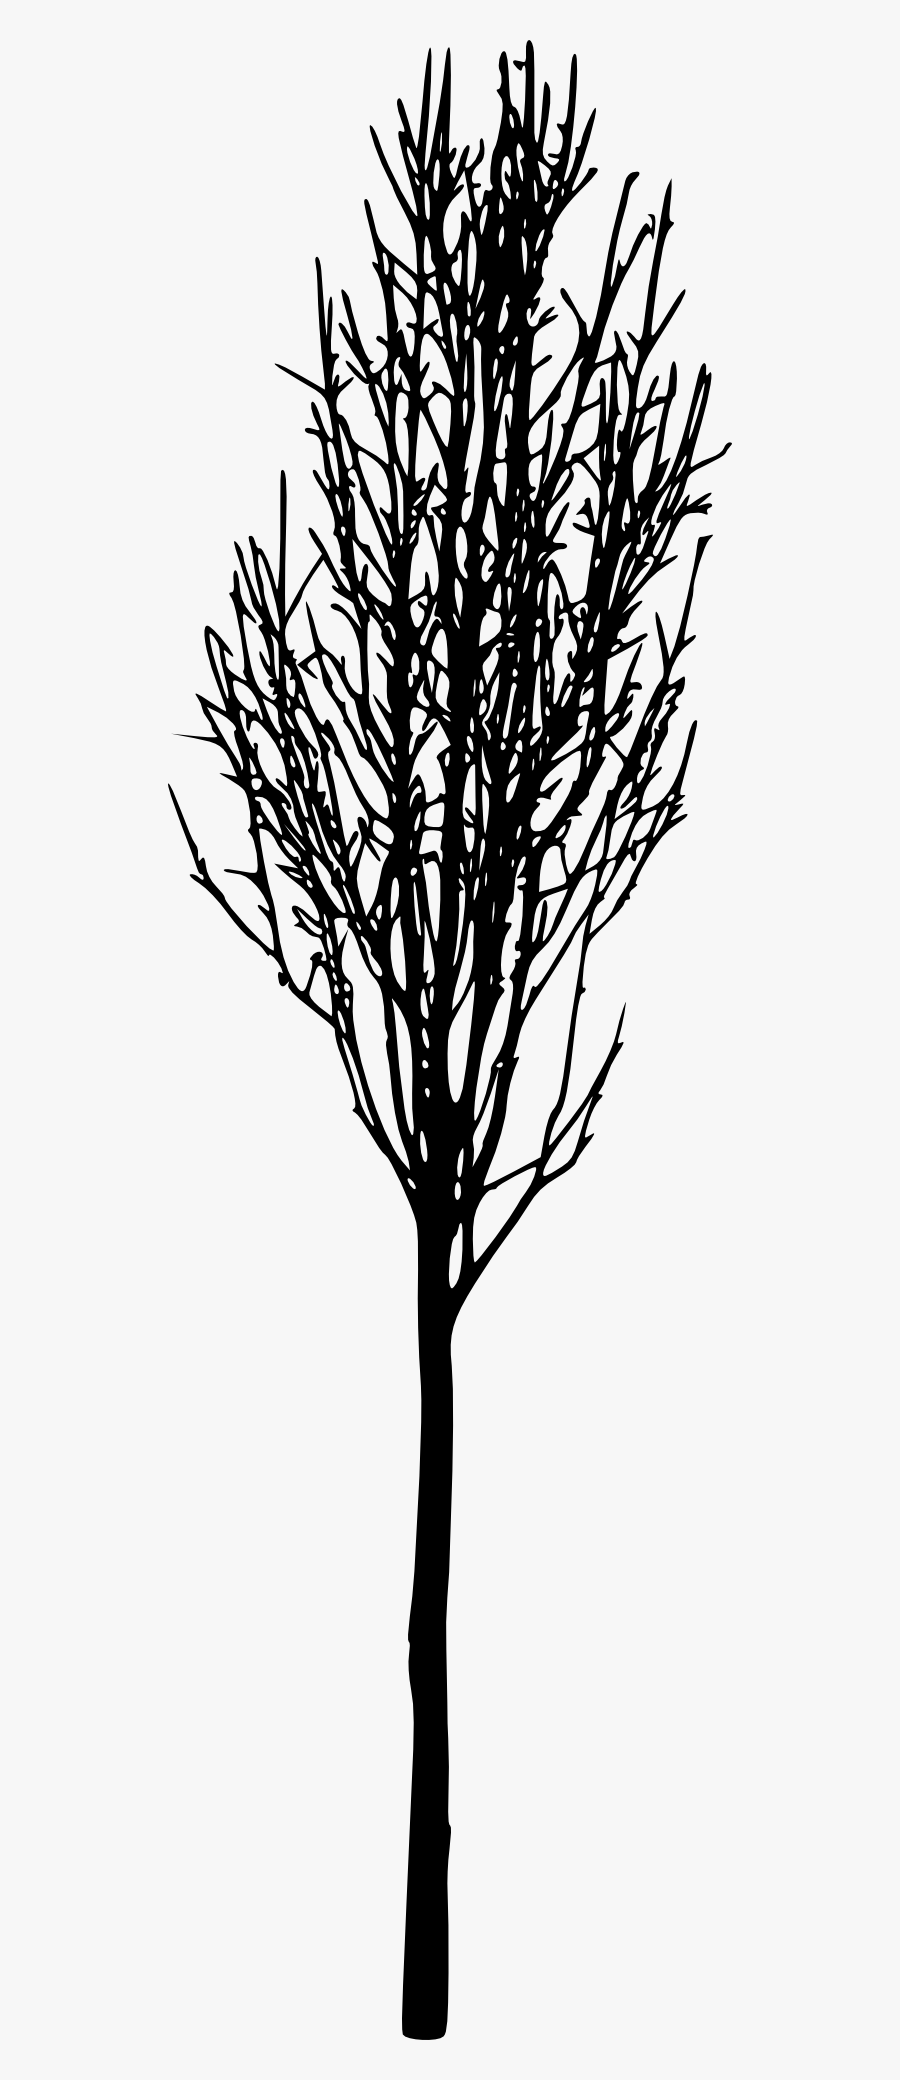 Tree With Roots Silhouette Png - Silhouette, Transparent Clipart